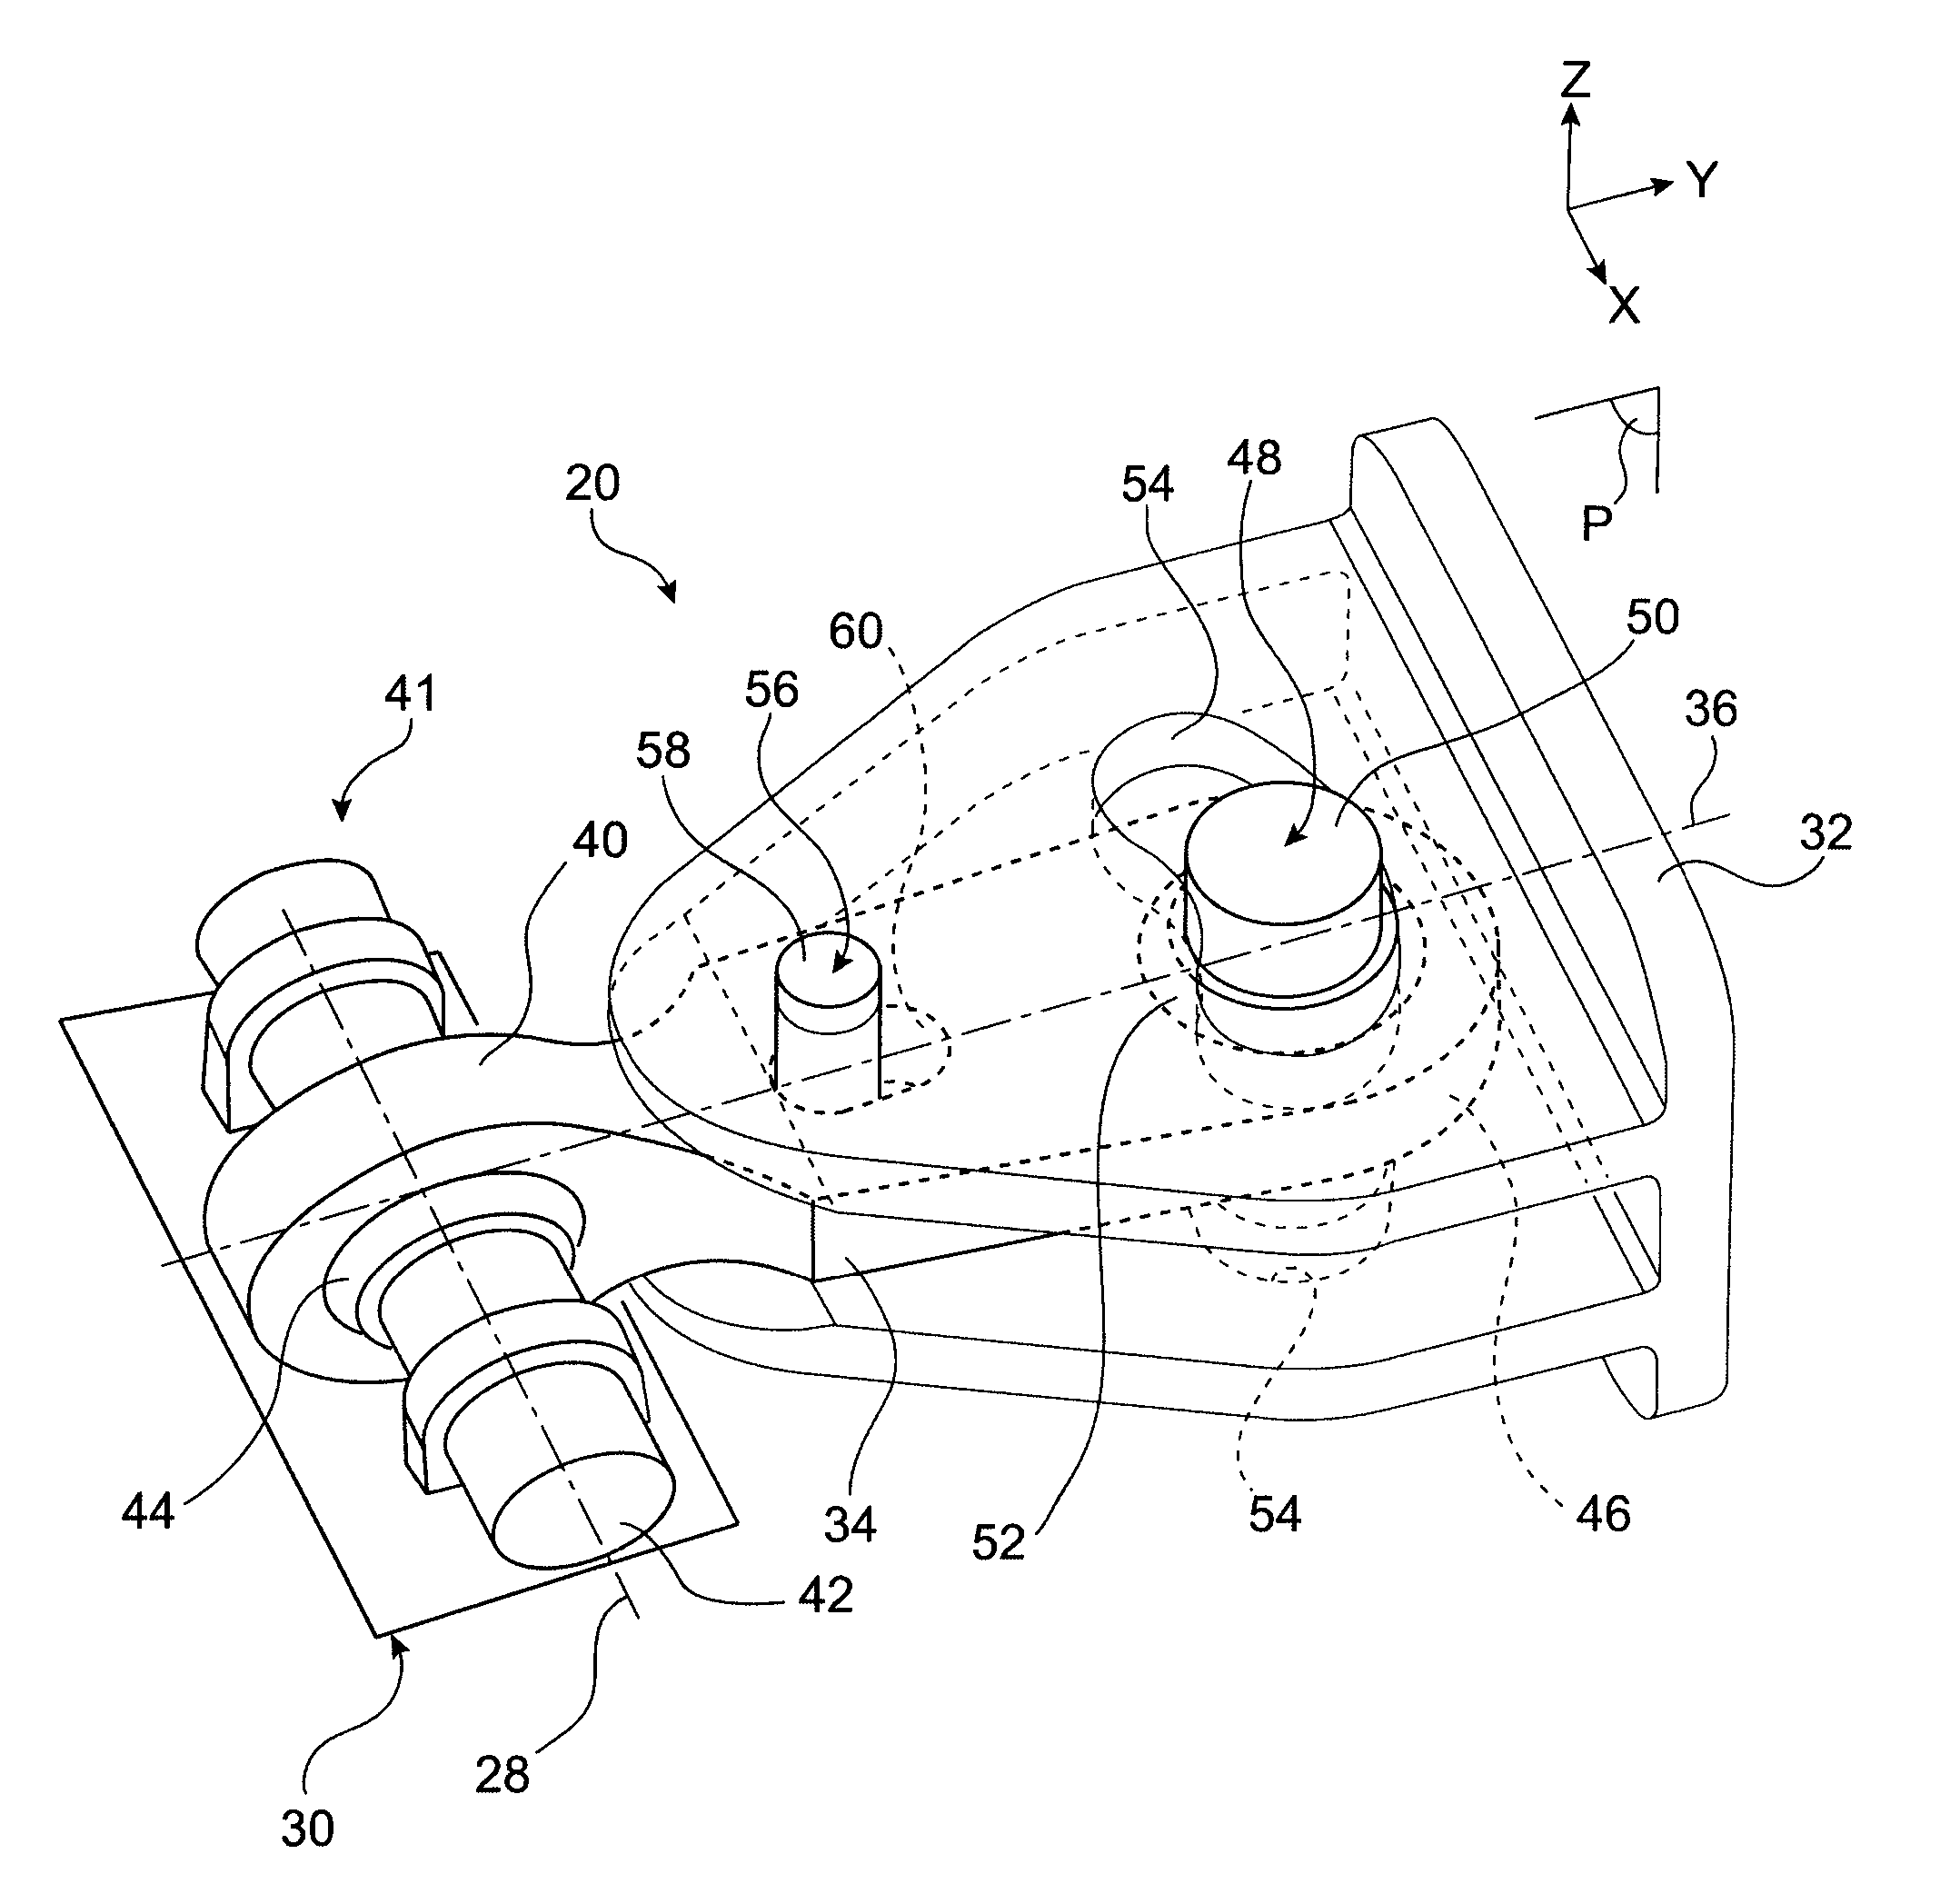 Hinge device of a nacelle cowling of an aircraft engine on a supporting structure